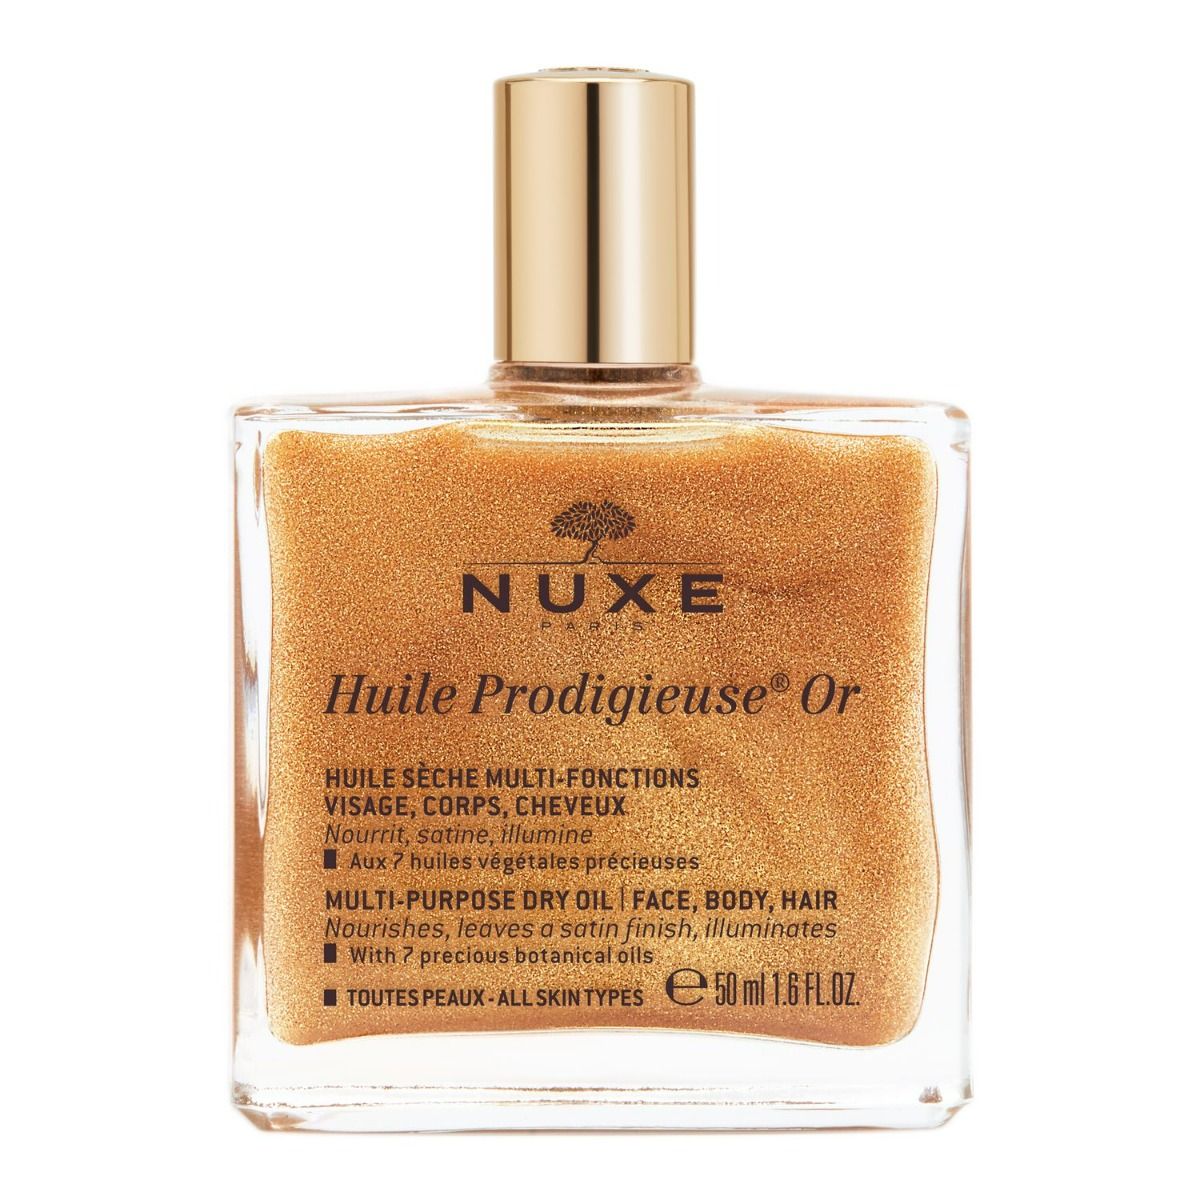 Nuxe Huile Prodigieuse Or масло для лица, тела и волос, 50 ml nuxe масло для тела huile prodigieuse florale 100 мл